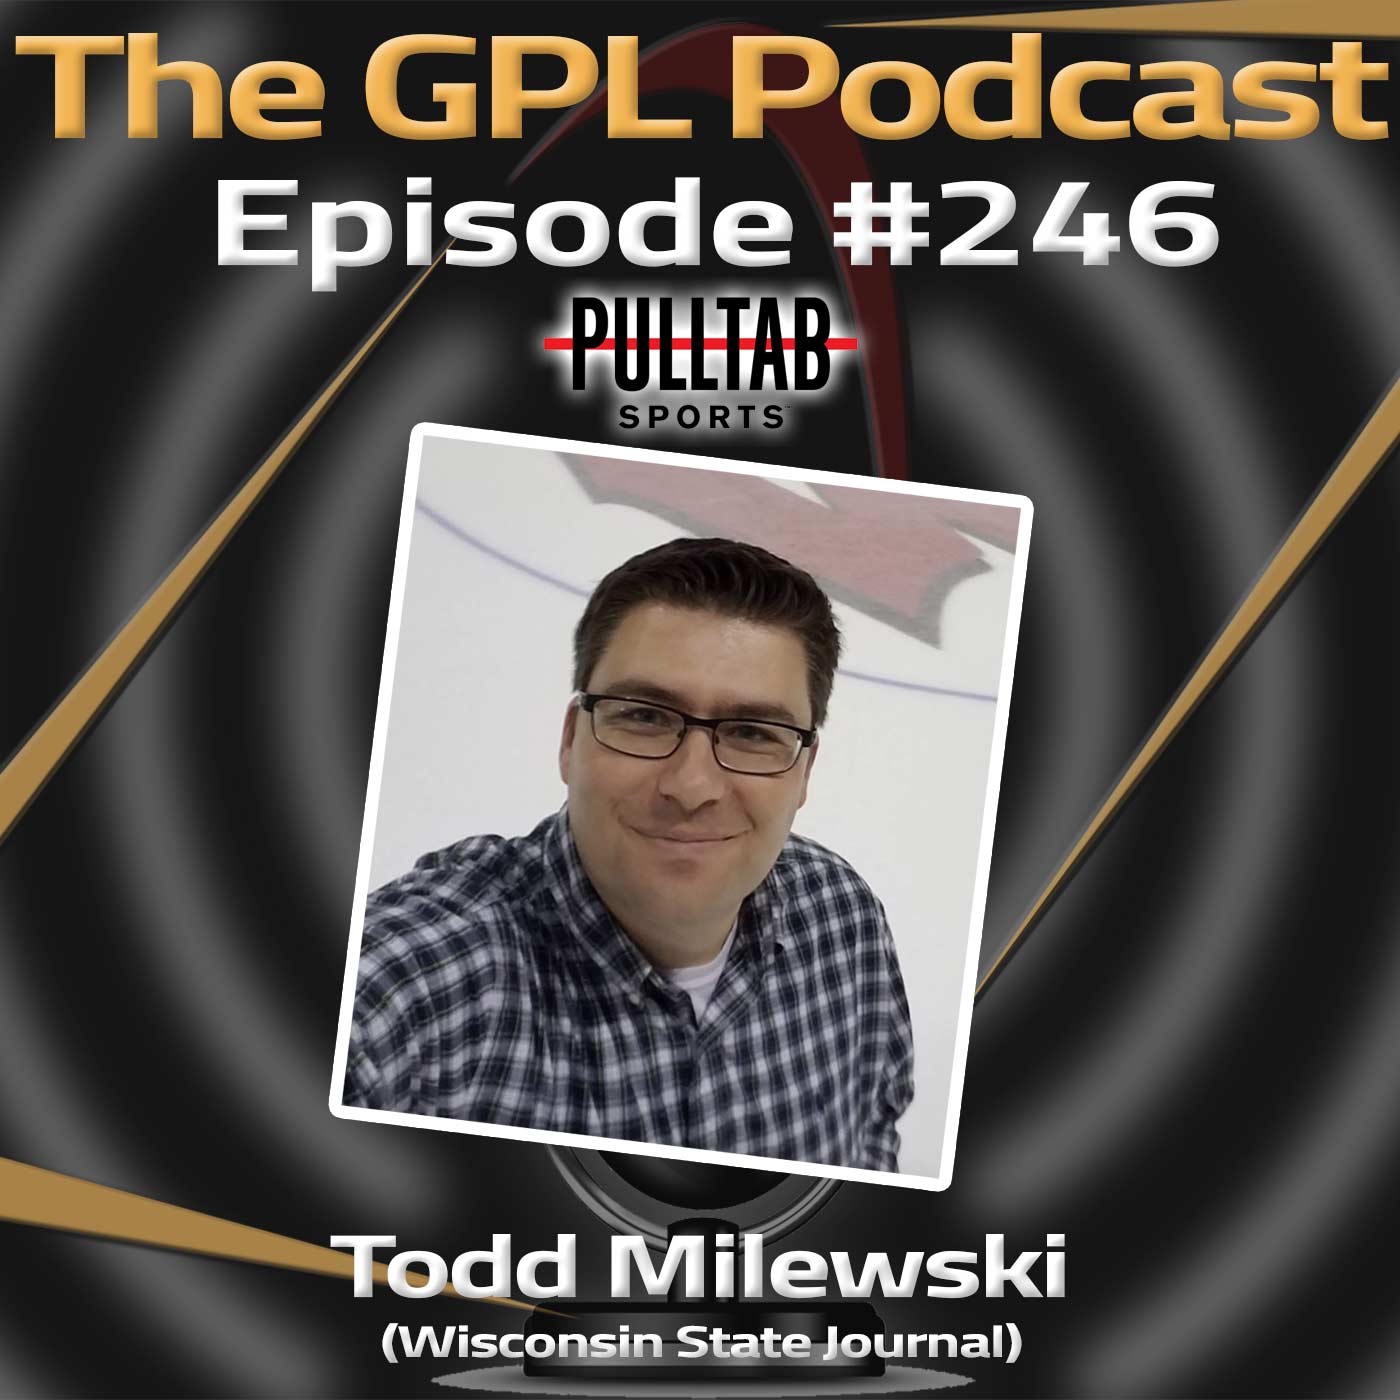 GPL Podcast #246: BADger week with Todd Milewski